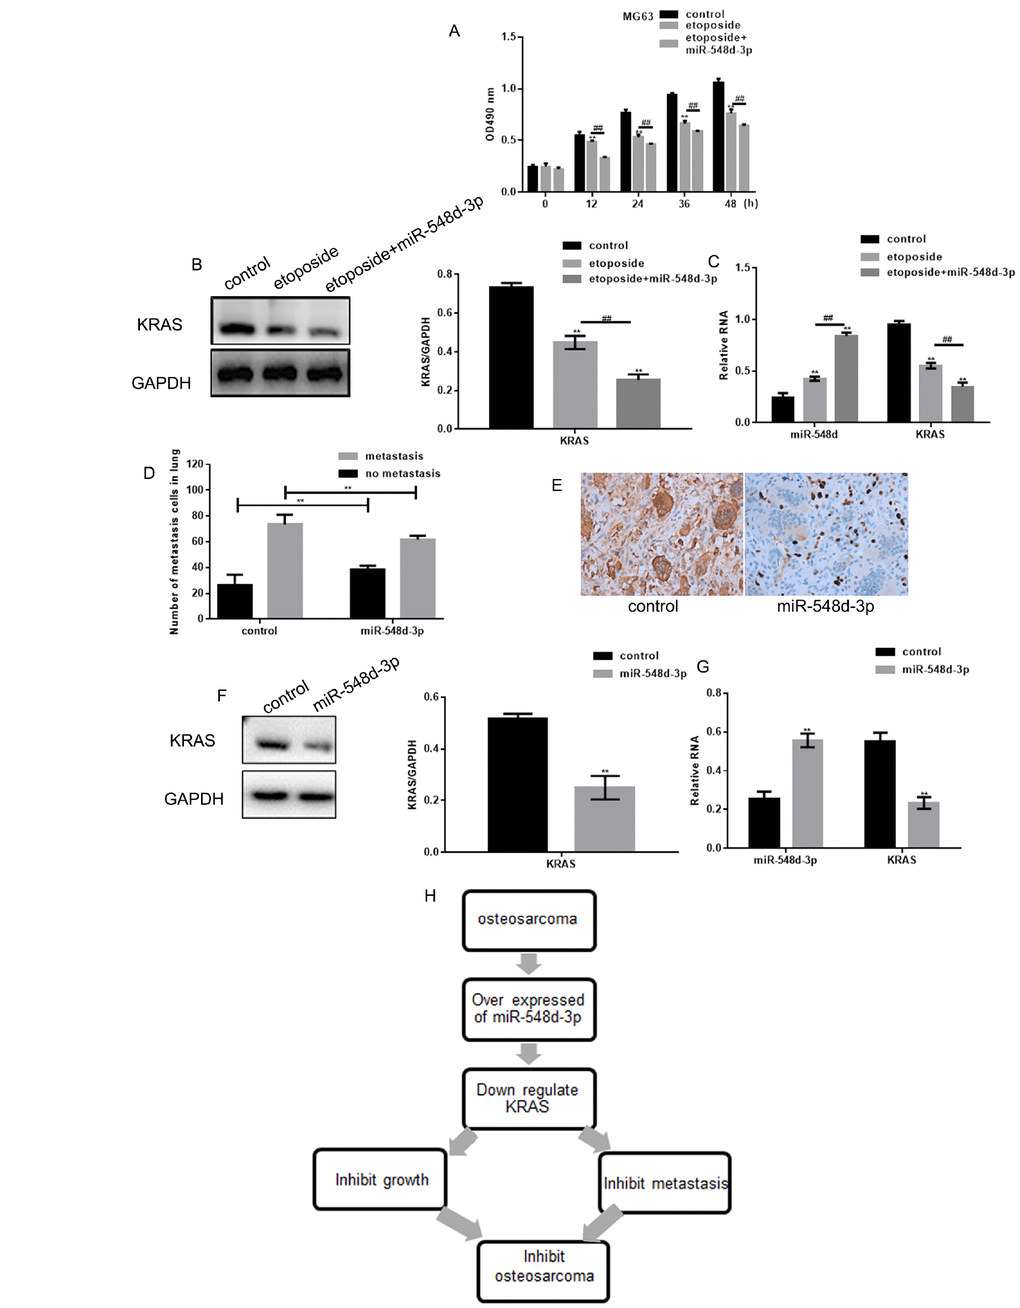 MiR-548d-3p inhibits osteosarcoma. (A) MG63 cell growth was measured with an MTT assay after treatment with control miRNA, 10 μM etoposide combined with control miRNA, or 10 μM etoposide combined with miR-548d-3p mimics. The results represent the mean±SD of three independent experiments. **P P B, C) MG63 cells were treated with control miRNA, 10 μM etoposide combined with control miRNA, or 10 μM etoposide combined with miR-548d-3p mimics. The protein and mRNA levels of KRAS were then measured by Western blotting and real-time PCR, respectively. **P P D) The migration of osteosarcoma cells to the lungs in mice treated with miR-548d-3p agomirs or control miRNA. The results represent the mean±SD. **P E) Immunohistochemical staining revealed the expression of KRAS in osteosarcoma in the control group and the miR-548d-3p overexpression group. (F, G) The protein and mRNA levels of KRAS were measured in MG63 cells by Western blotting and real-time PCR, respectively. The results represent the mean±SD of three independent experiments. **P H) The mechanism proposed in this article.